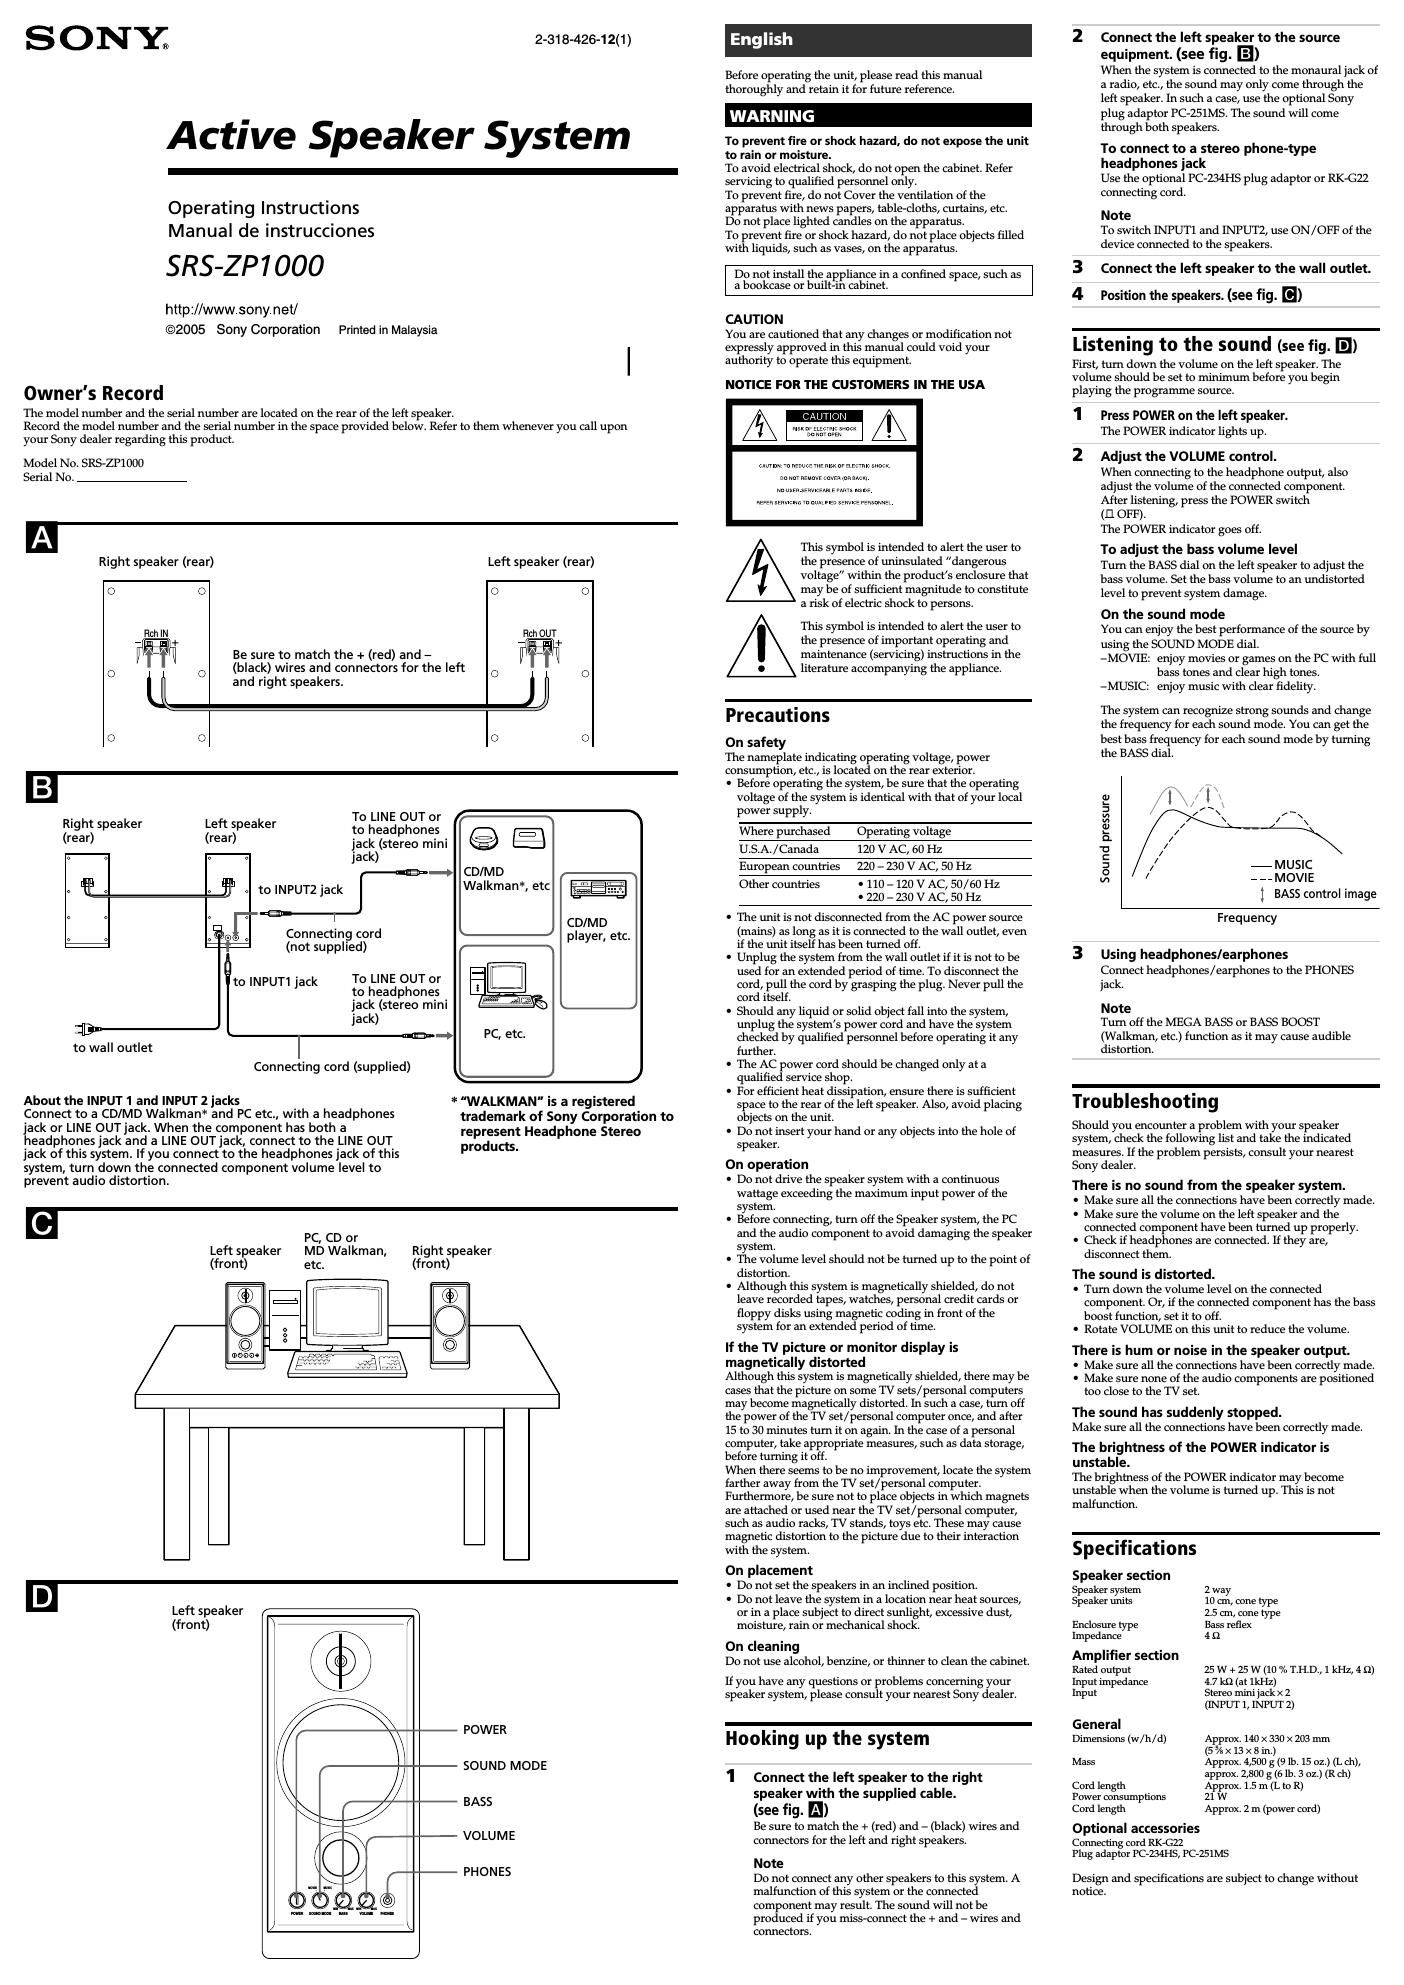 sony srs zp 1000 owners manual